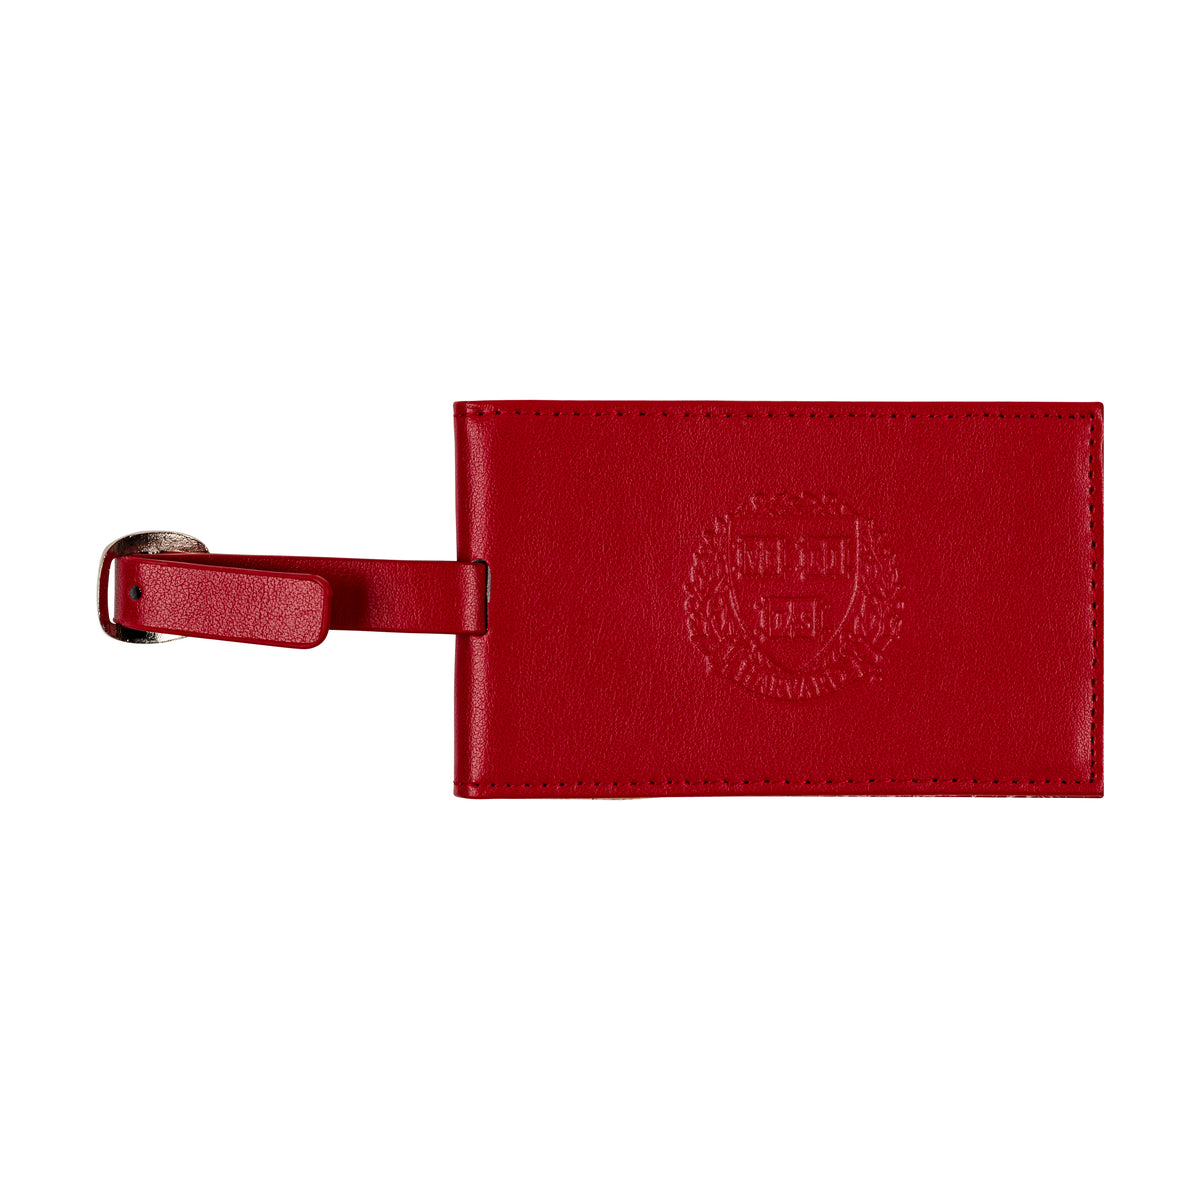 University of Wisconsin - Madison Faux Leather Luggage Tag, Classic